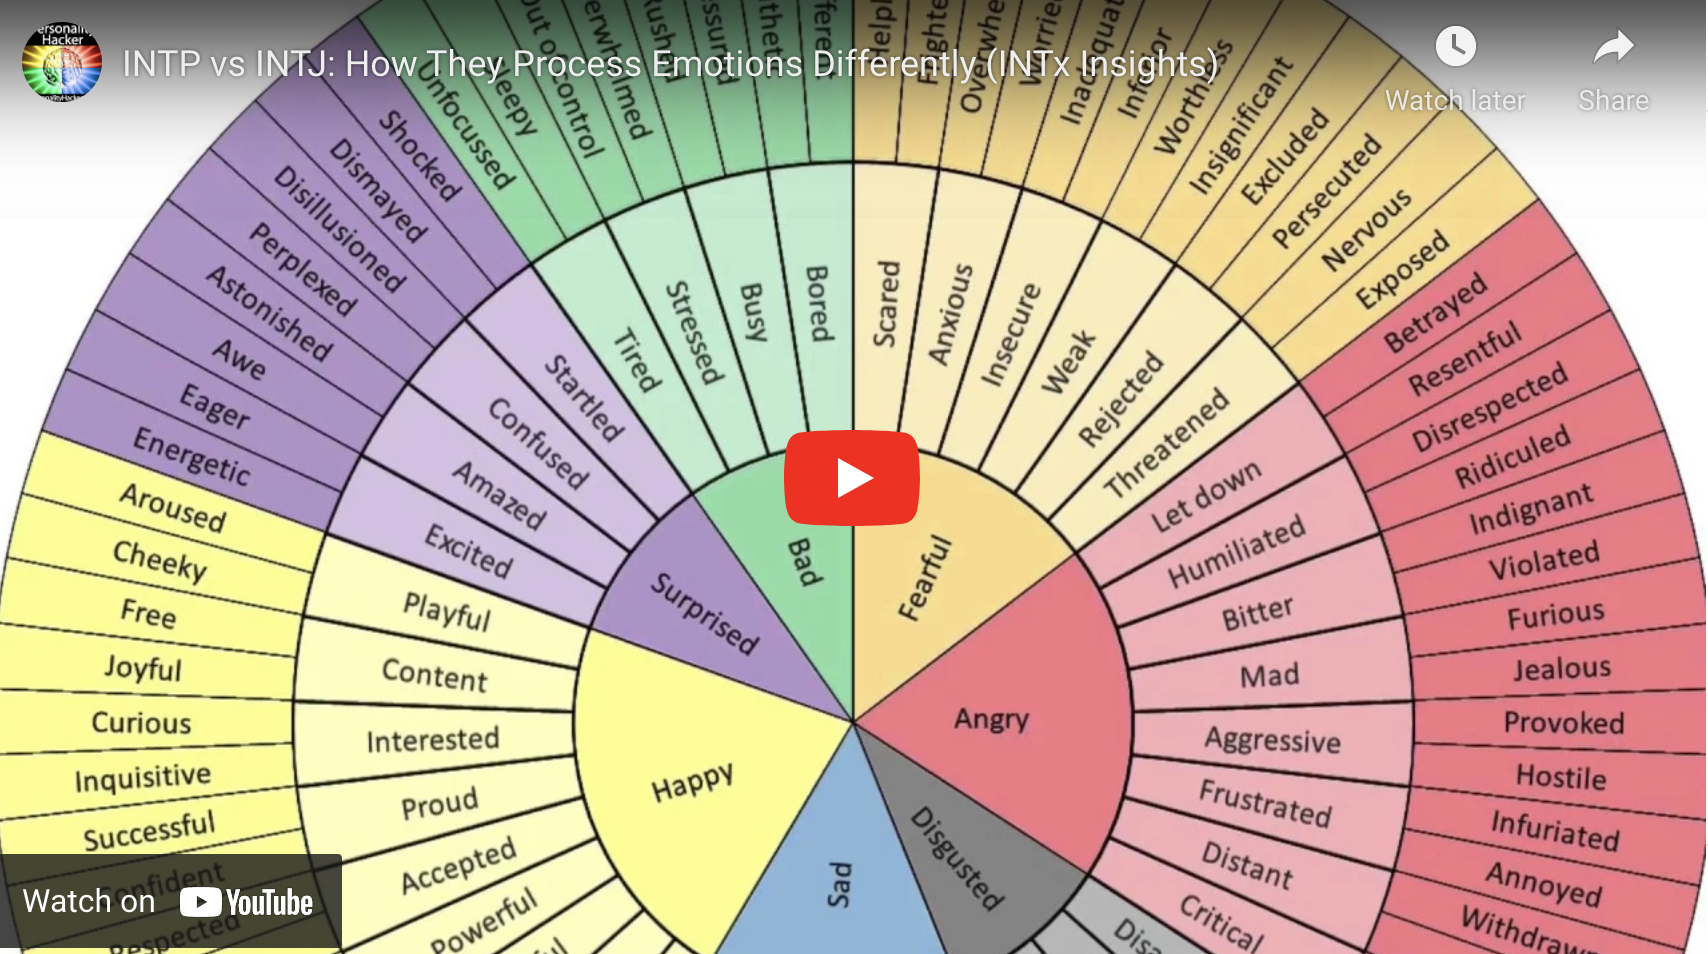 INTP vs INTJ: How They Process Emotions Differently (INTx Insights)